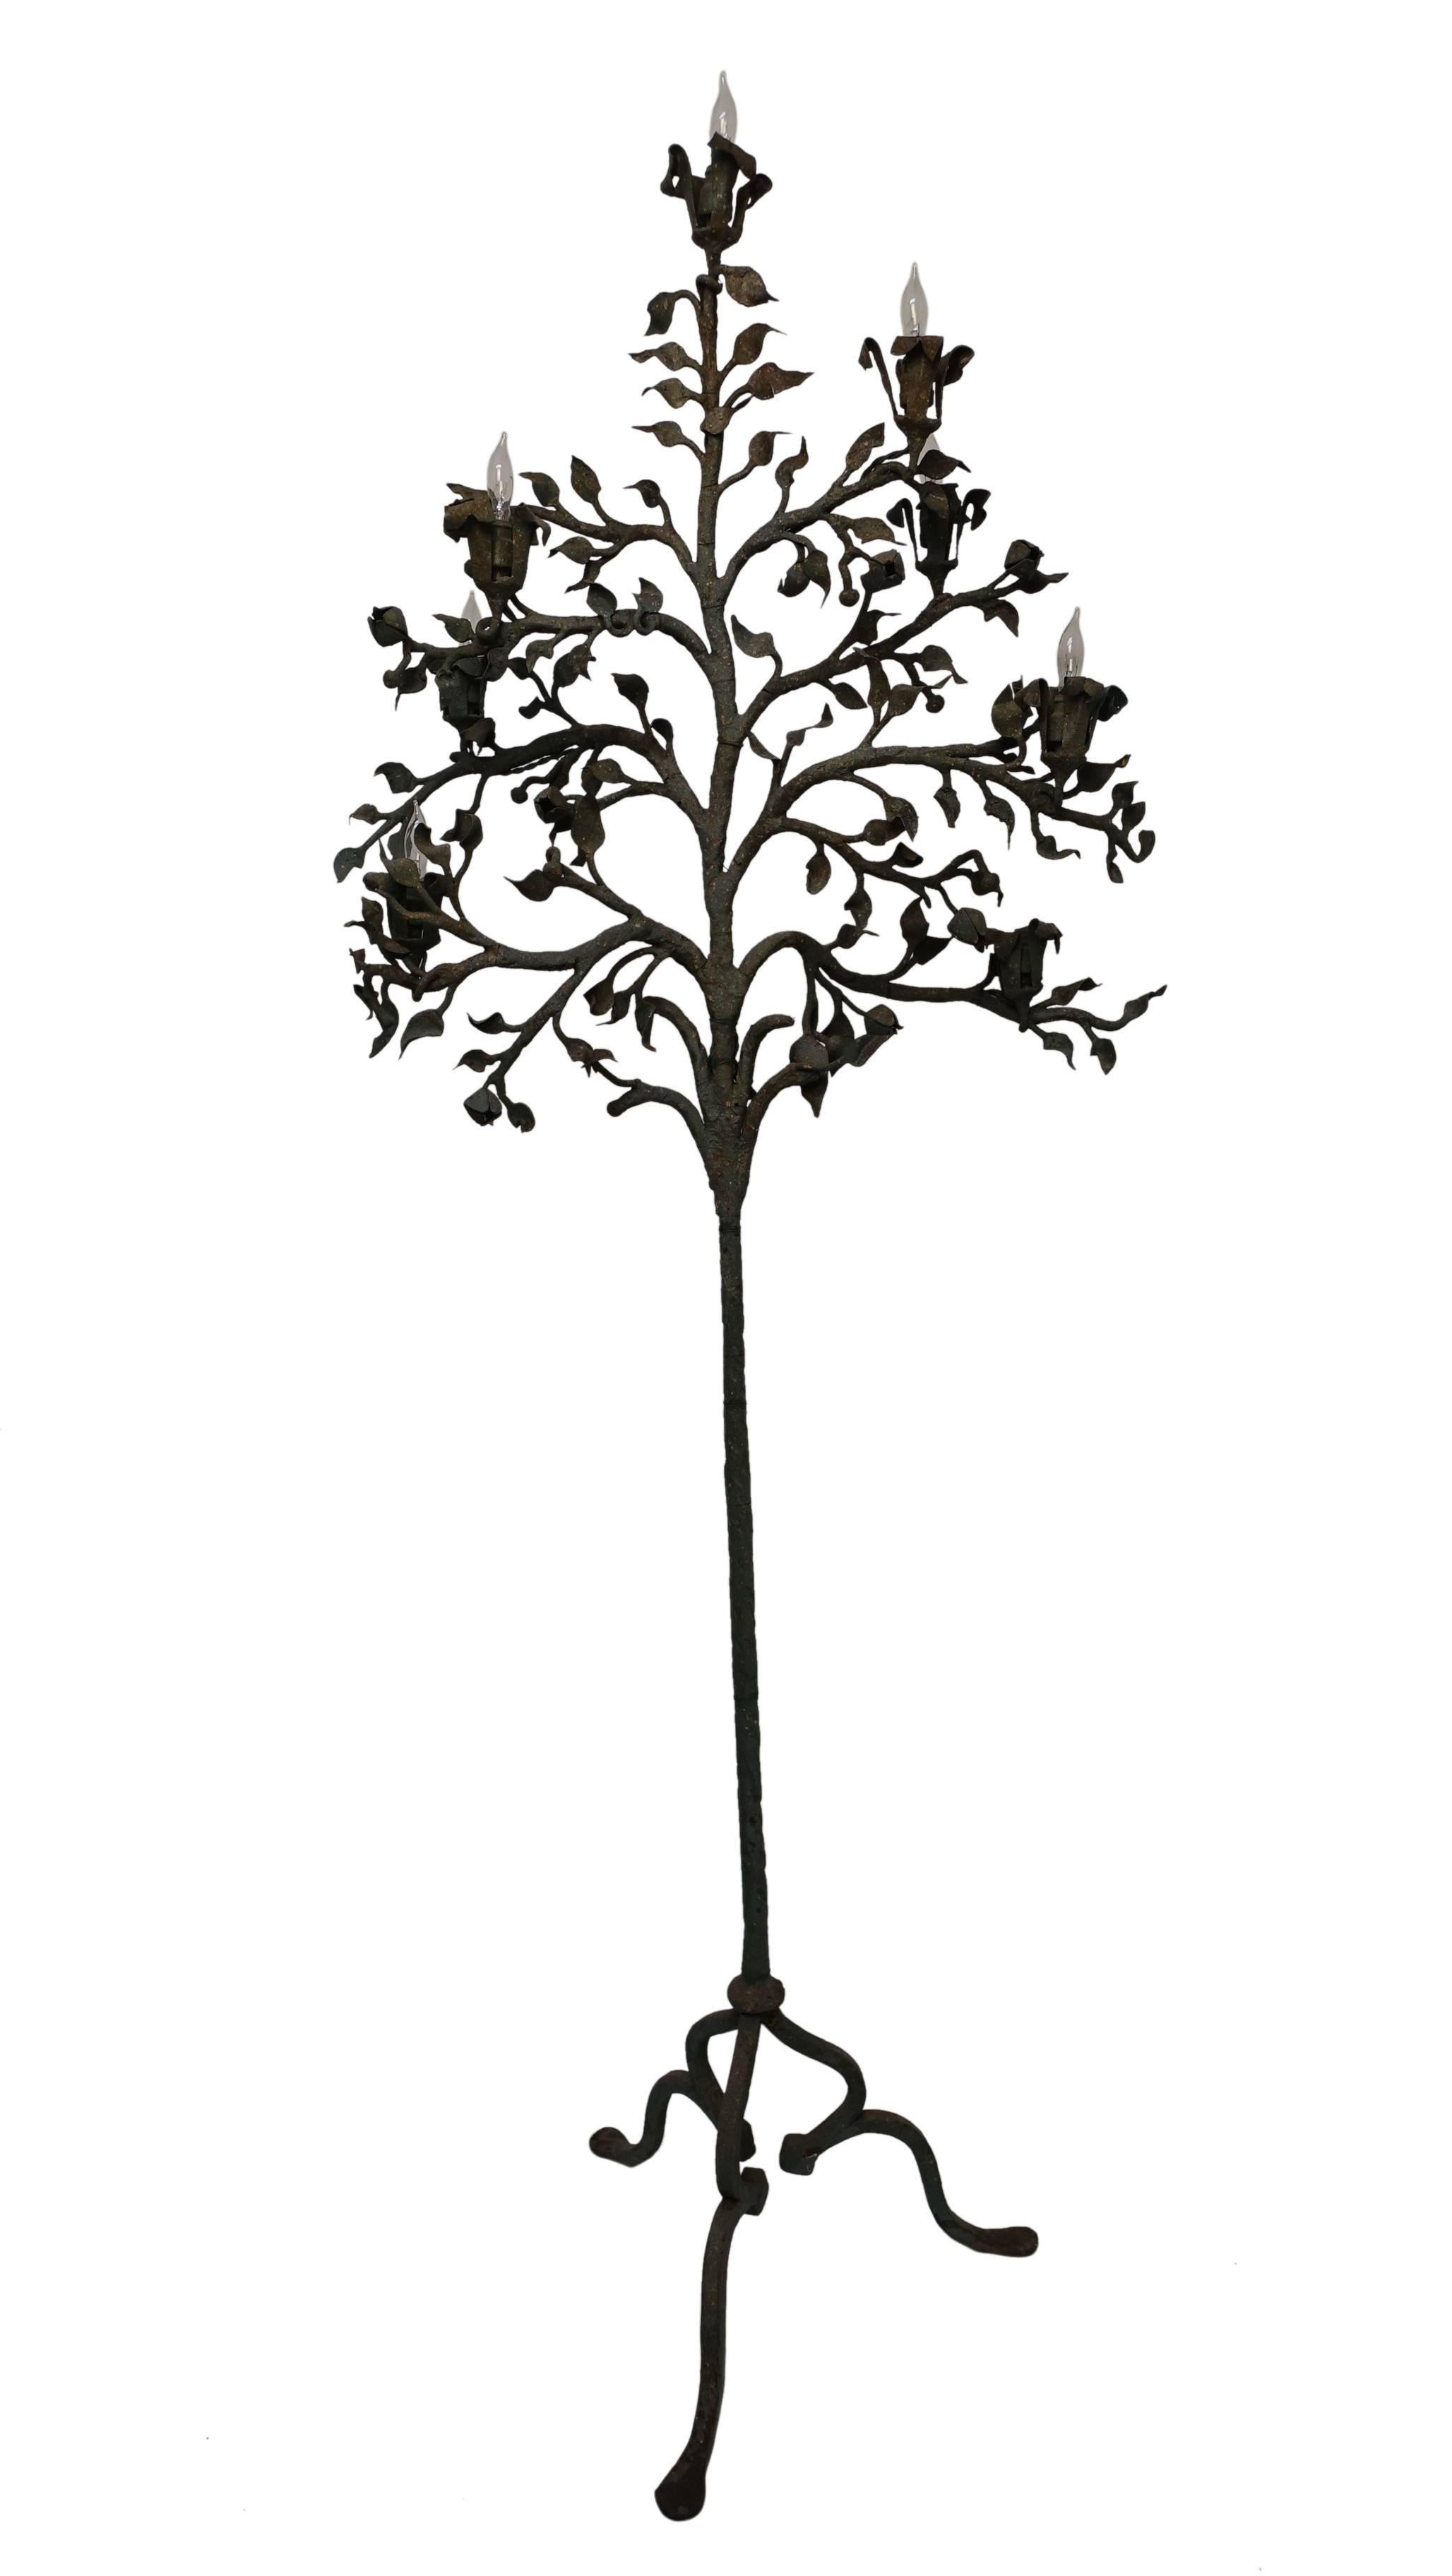 Pair of Wrought Iron Tree Form Torchiere Floor Lamps, Italy, 19th Century 5